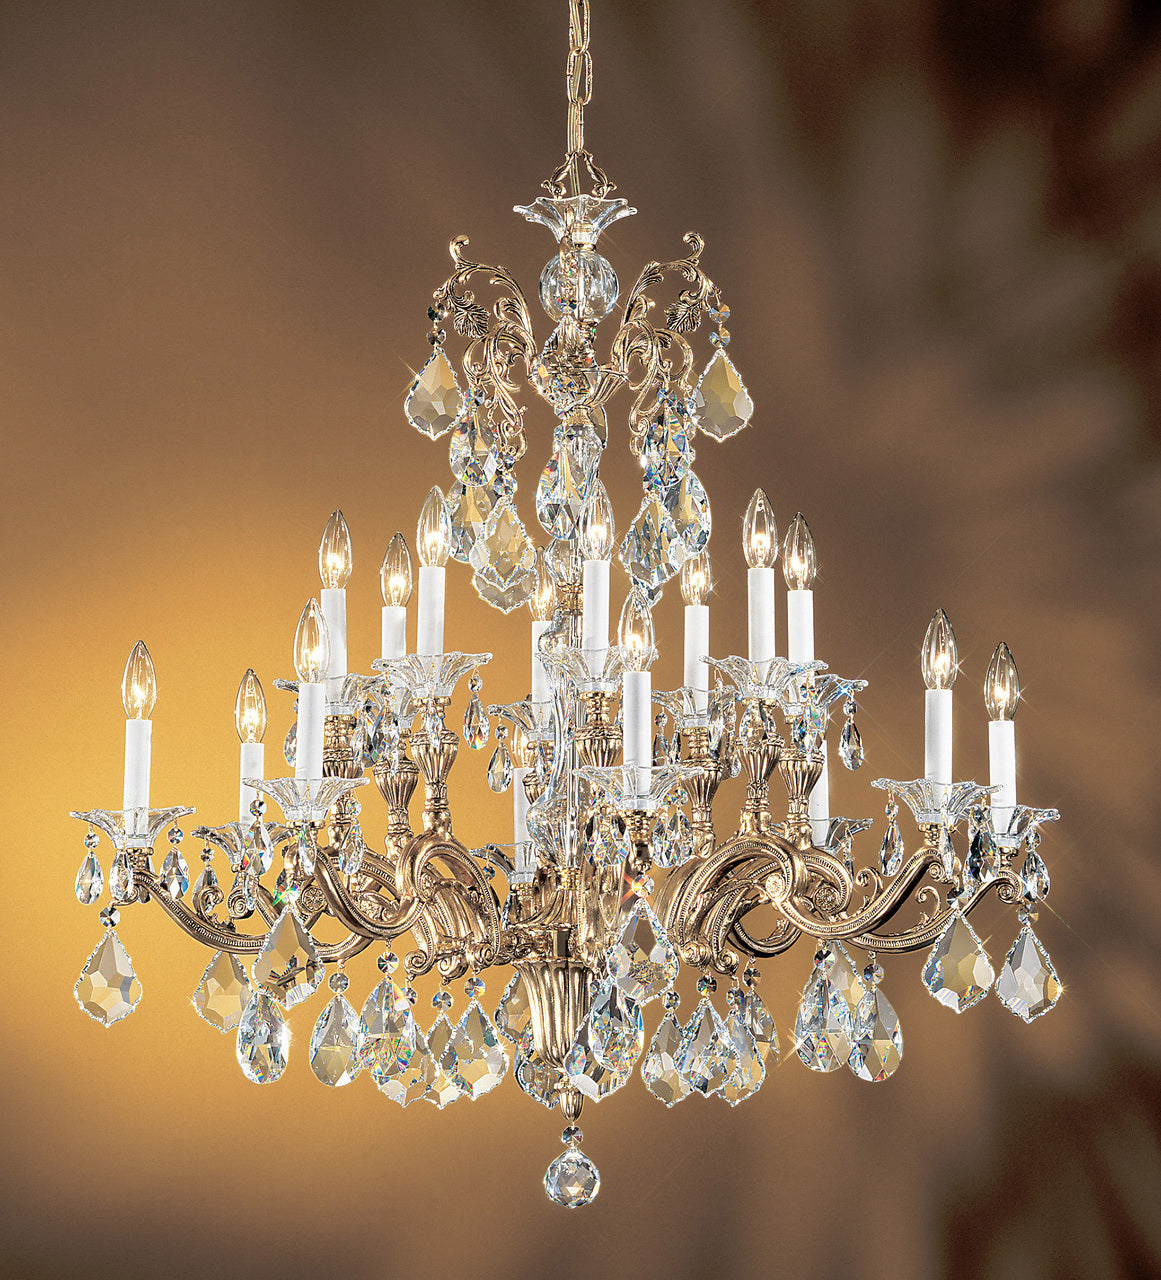 Classic Lighting 57116 BBK CGT Via Firenze Crystal Chandelier in Bronze/Black Patina (Imported from Spain)